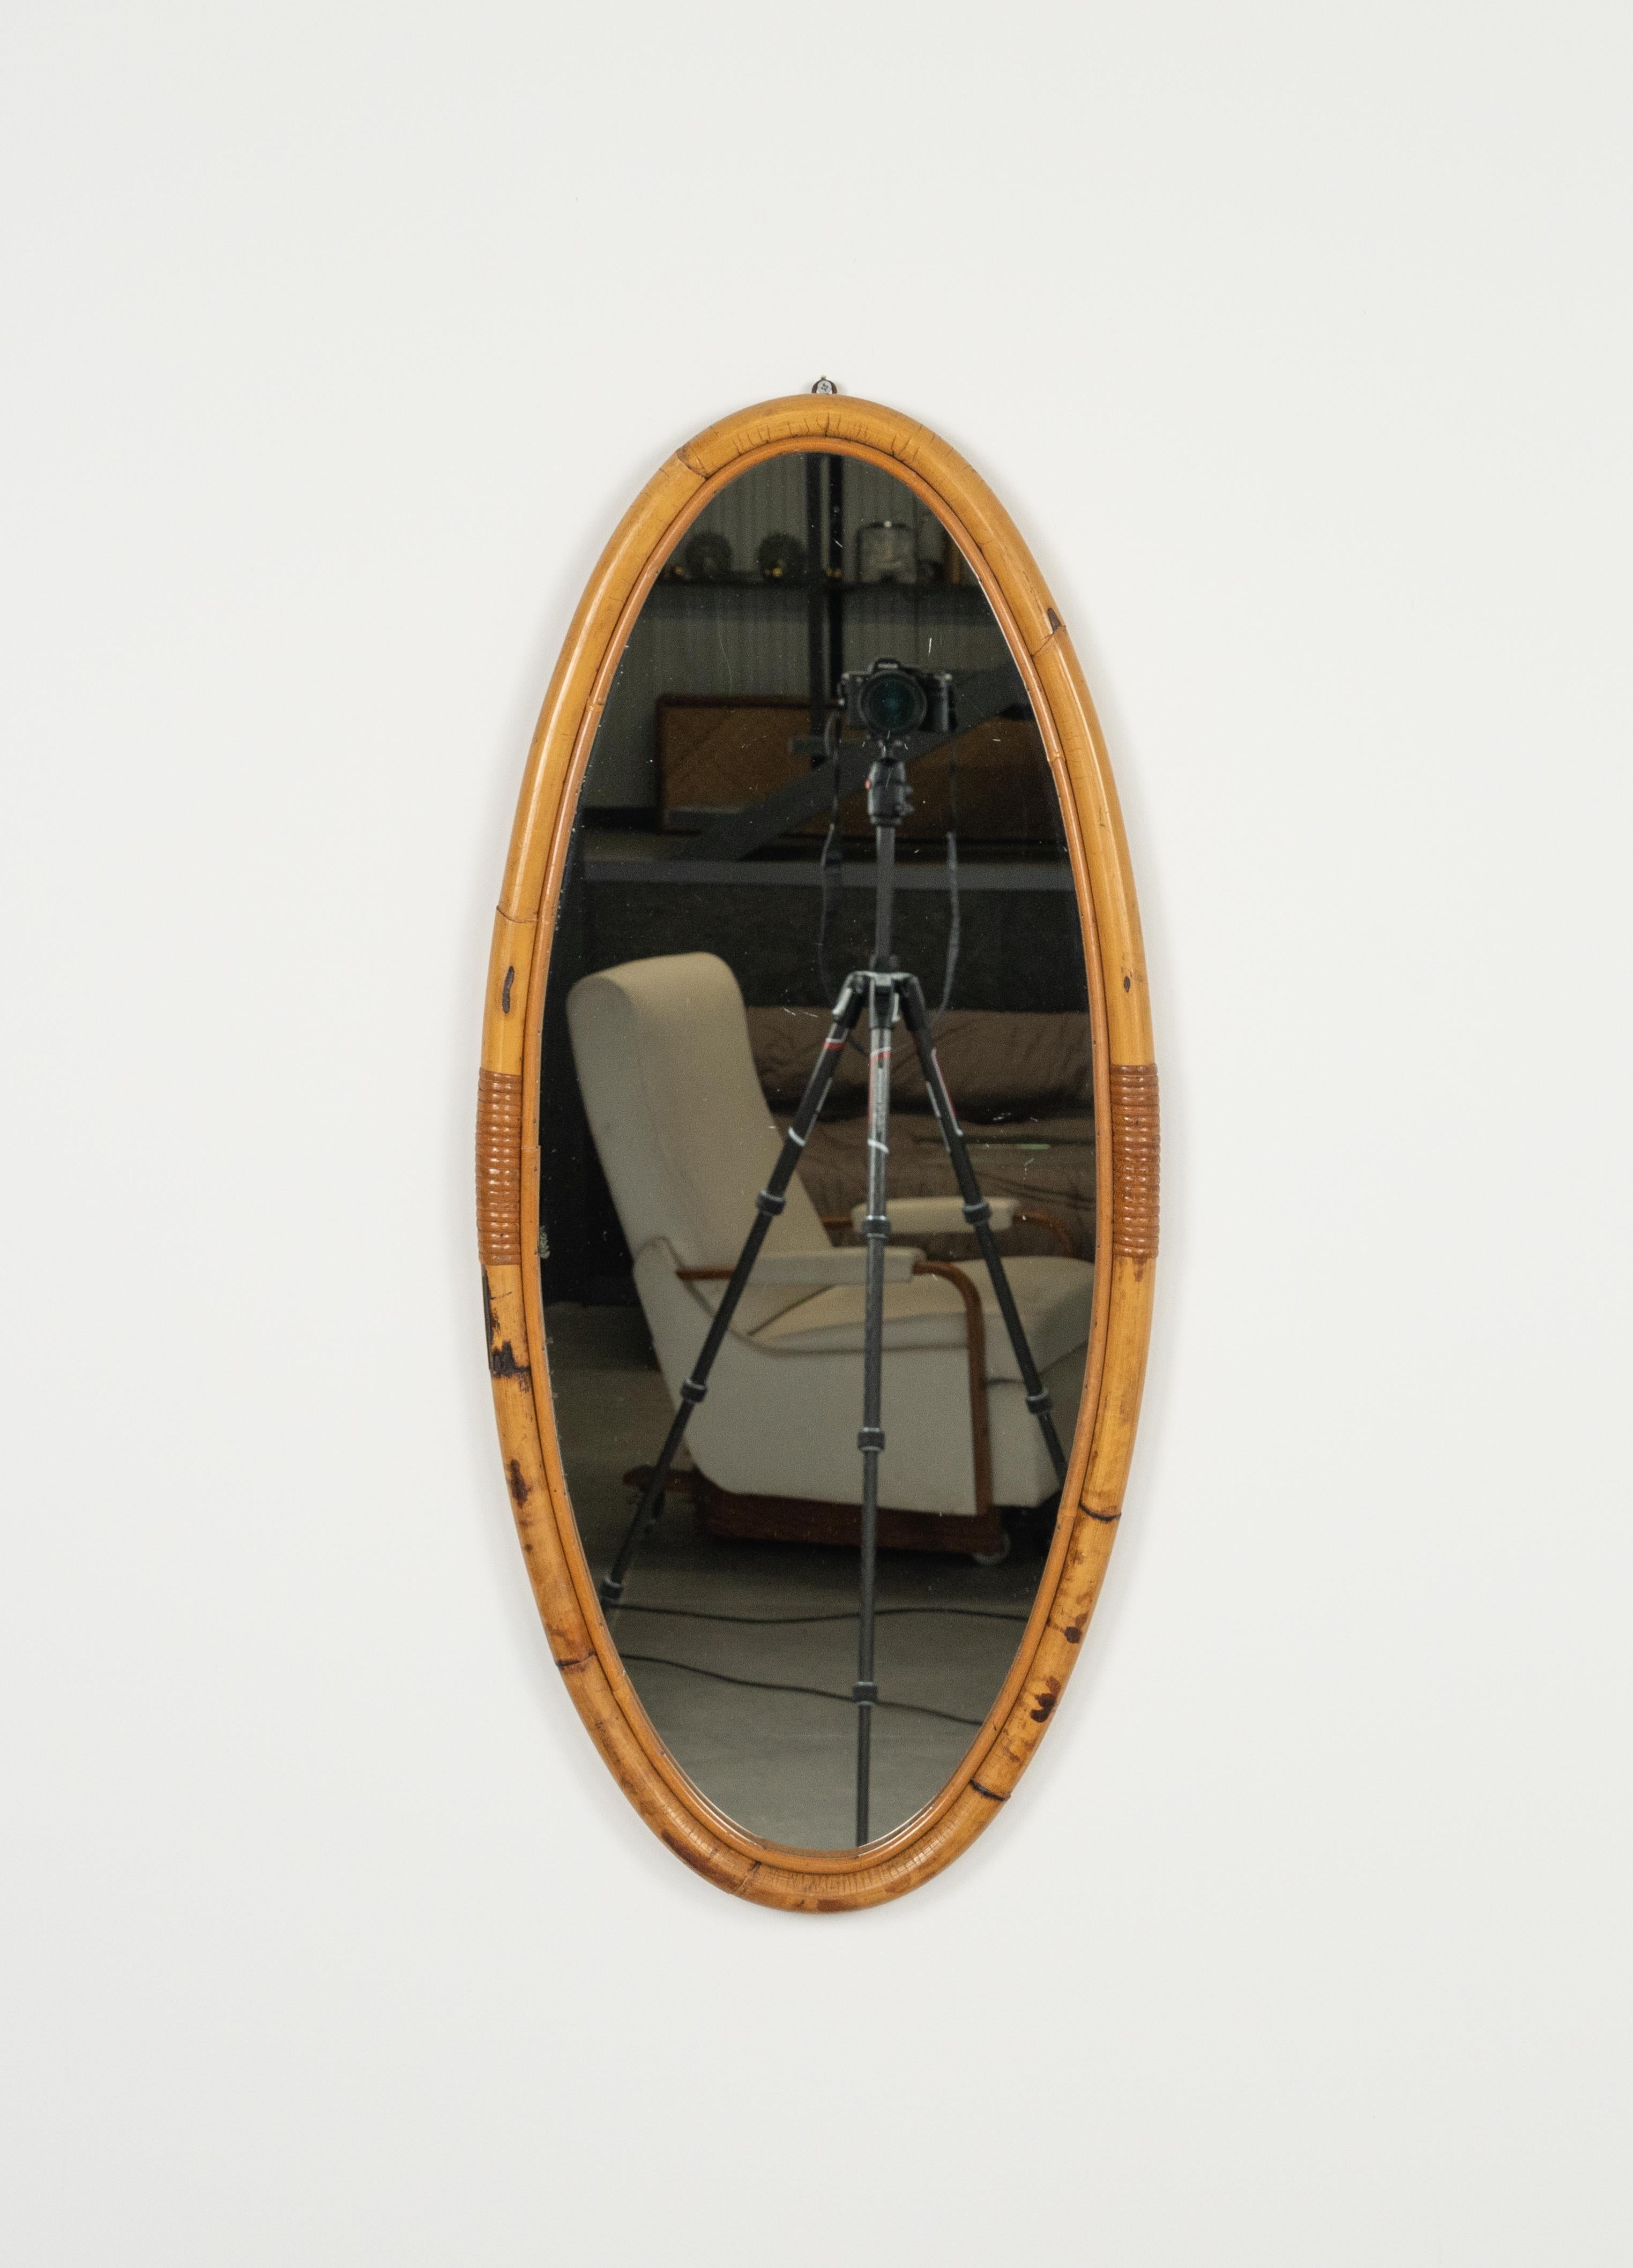 Midcentury beautiful oval wall mirror in rattan and bamboo.

Made in Italy in the 1960s.

The mirror would be perfect for a bedroom, dressing room, cloakroom or hallway.